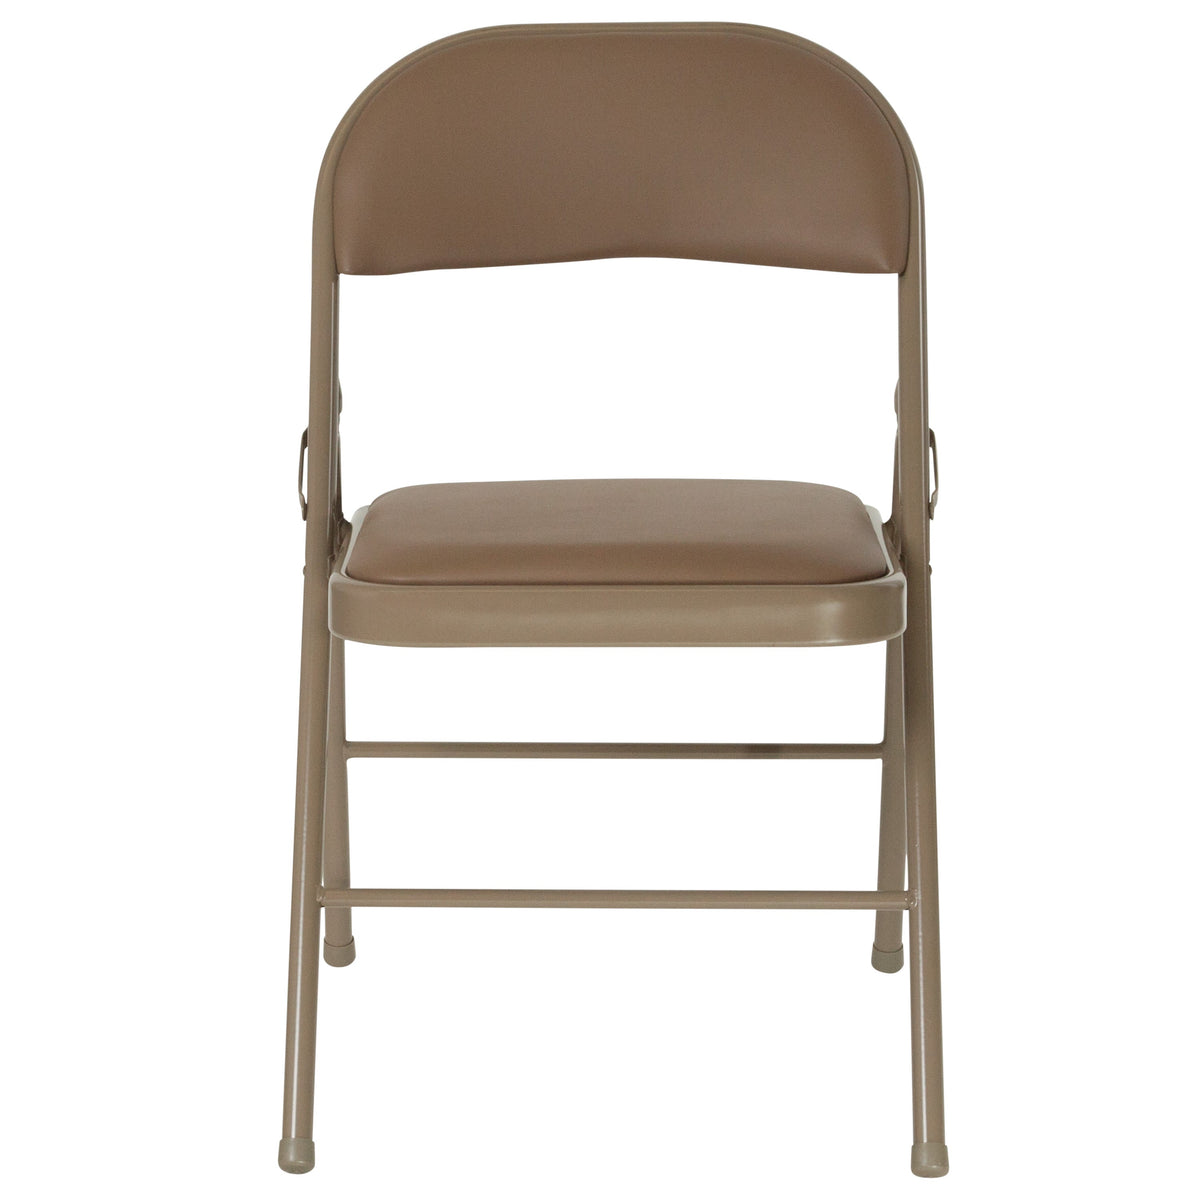 Beige |#| Double Braced Beige Vinyl Folding Chair - Commercial and Event Folding Chairs